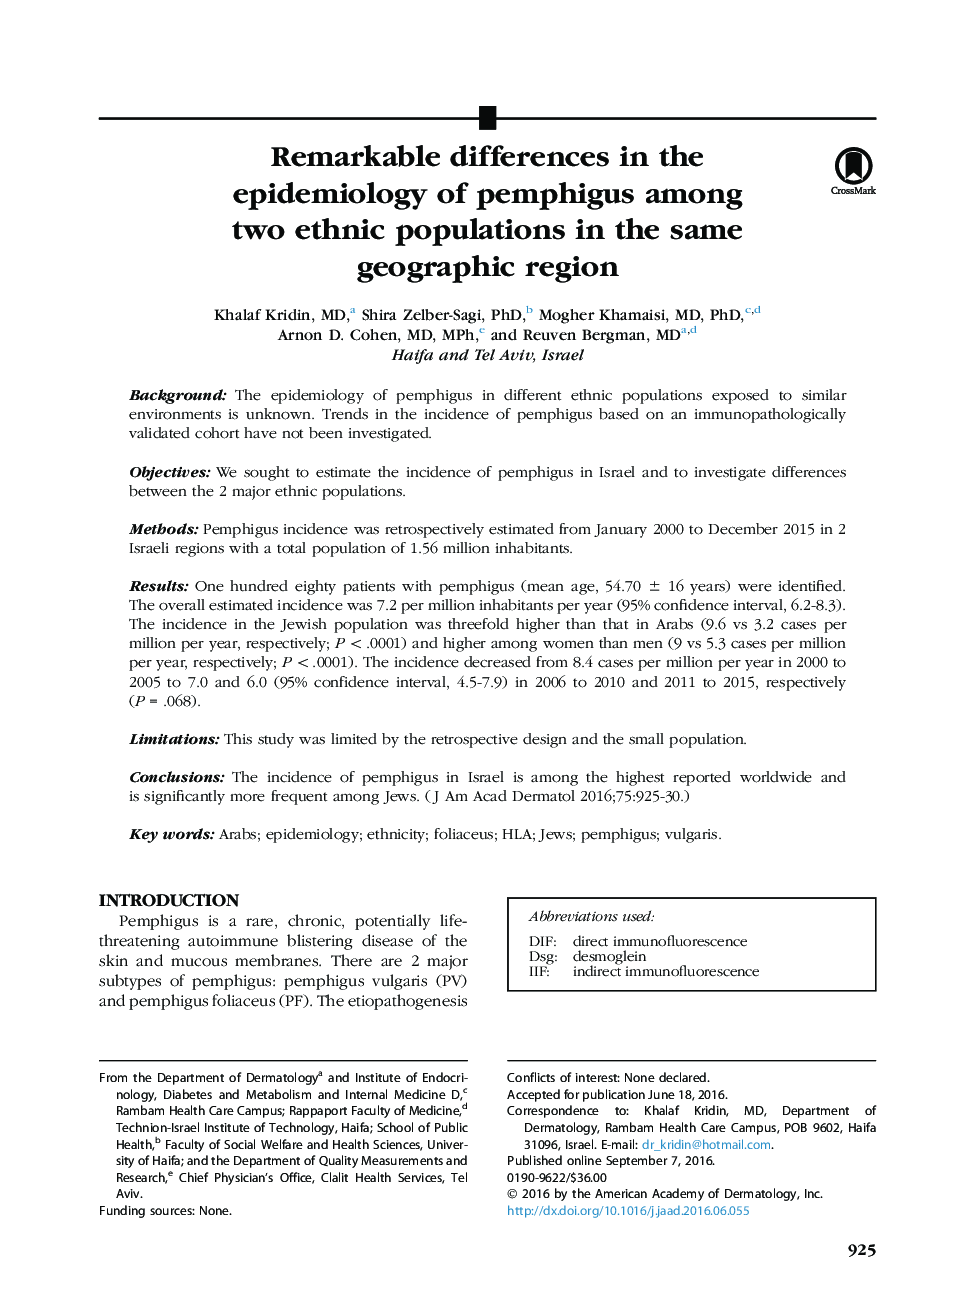 Remarkable differences in the epidemiology of pemphigus among two ethnic populations in the same geographic region